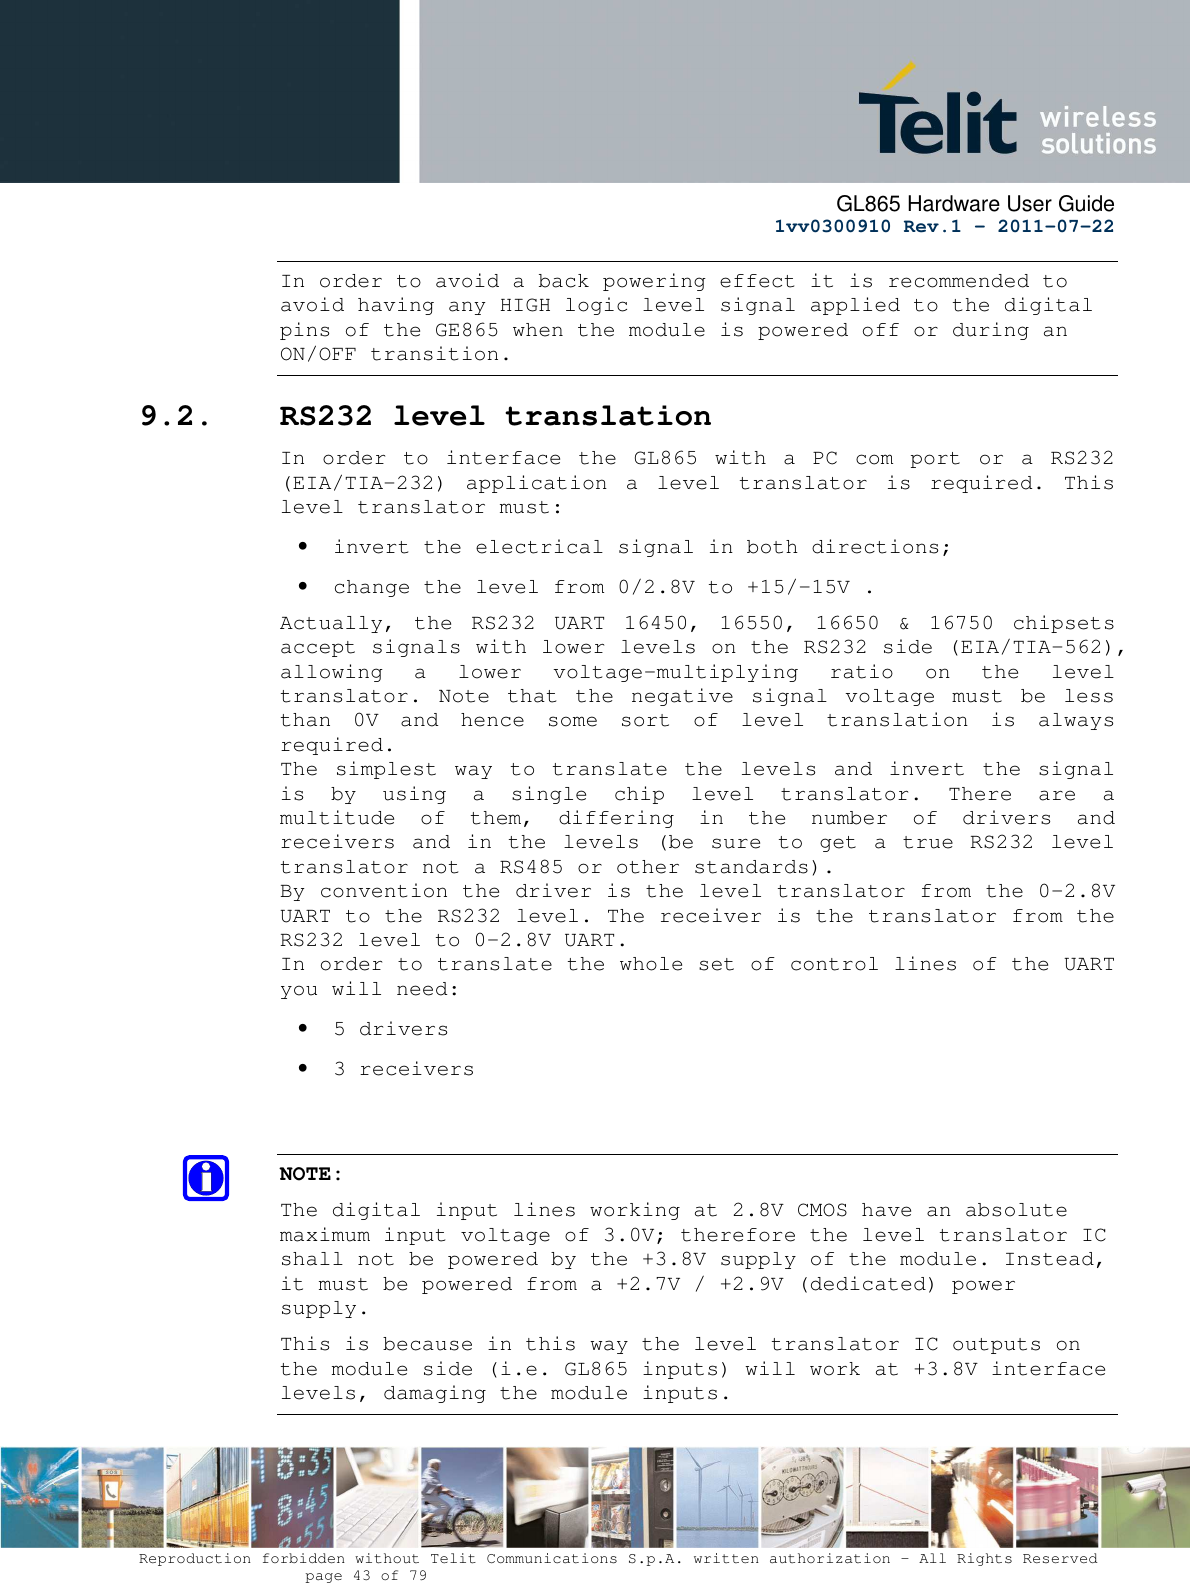      GL865 Hardware User Guide     1vv0300910 Rev.1 – 2011-07-22       Reproduction forbidden without Telit Communications S.p.A. written authorization - All Rights Reserved    page 43 of 79  In order to avoid a back powering effect it is recommended to avoid having any HIGH logic level signal applied to the digital pins of the GE865 when the module is powered off or during an ON/OFF transition. 9.2. RS232 level translation In  order  to  interface  the  GL865  with  a  PC  com  port  or  a  RS232 (EIA/TIA-232)  application  a  level  translator  is  required.  This level translator must: • invert the electrical signal in both directions; • change the level from 0/2.8V to +15/-15V . Actually,  the  RS232  UART  16450,  16550,  16650  &amp;  16750  chipsets accept signals with lower levels on the RS232 side (EIA/TIA-562), allowing  a  lower  voltage-multiplying  ratio  on  the  level translator.  Note  that  the  negative  signal  voltage  must  be  less than  0V  and  hence  some  sort  of  level  translation  is  always required.  The  simplest  way  to  translate  the  levels  and  invert  the  signal is  by  using  a  single  chip  level  translator.  There  are  a multitude  of  them,  differing  in  the  number  of  drivers  and receivers and  in the levels (be  sure to get  a true RS232  level translator not a RS485 or other standards). By convention the driver is the level translator from the 0-2.8V UART to the RS232 level. The receiver is the translator from the RS232 level to 0-2.8V UART. In order to translate the whole set of control lines of the UART you will need: • 5 drivers • 3 receivers   NOTE: The digital input lines working at 2.8V CMOS have an absolute maximum input voltage of 3.0V; therefore the level translator IC shall not be powered by the +3.8V supply of the module. Instead, it must be powered from a +2.7V / +2.9V (dedicated) power supply. This is because in this way the level translator IC outputs on the module side (i.e. GL865 inputs) will work at +3.8V interface levels, damaging the module inputs.  